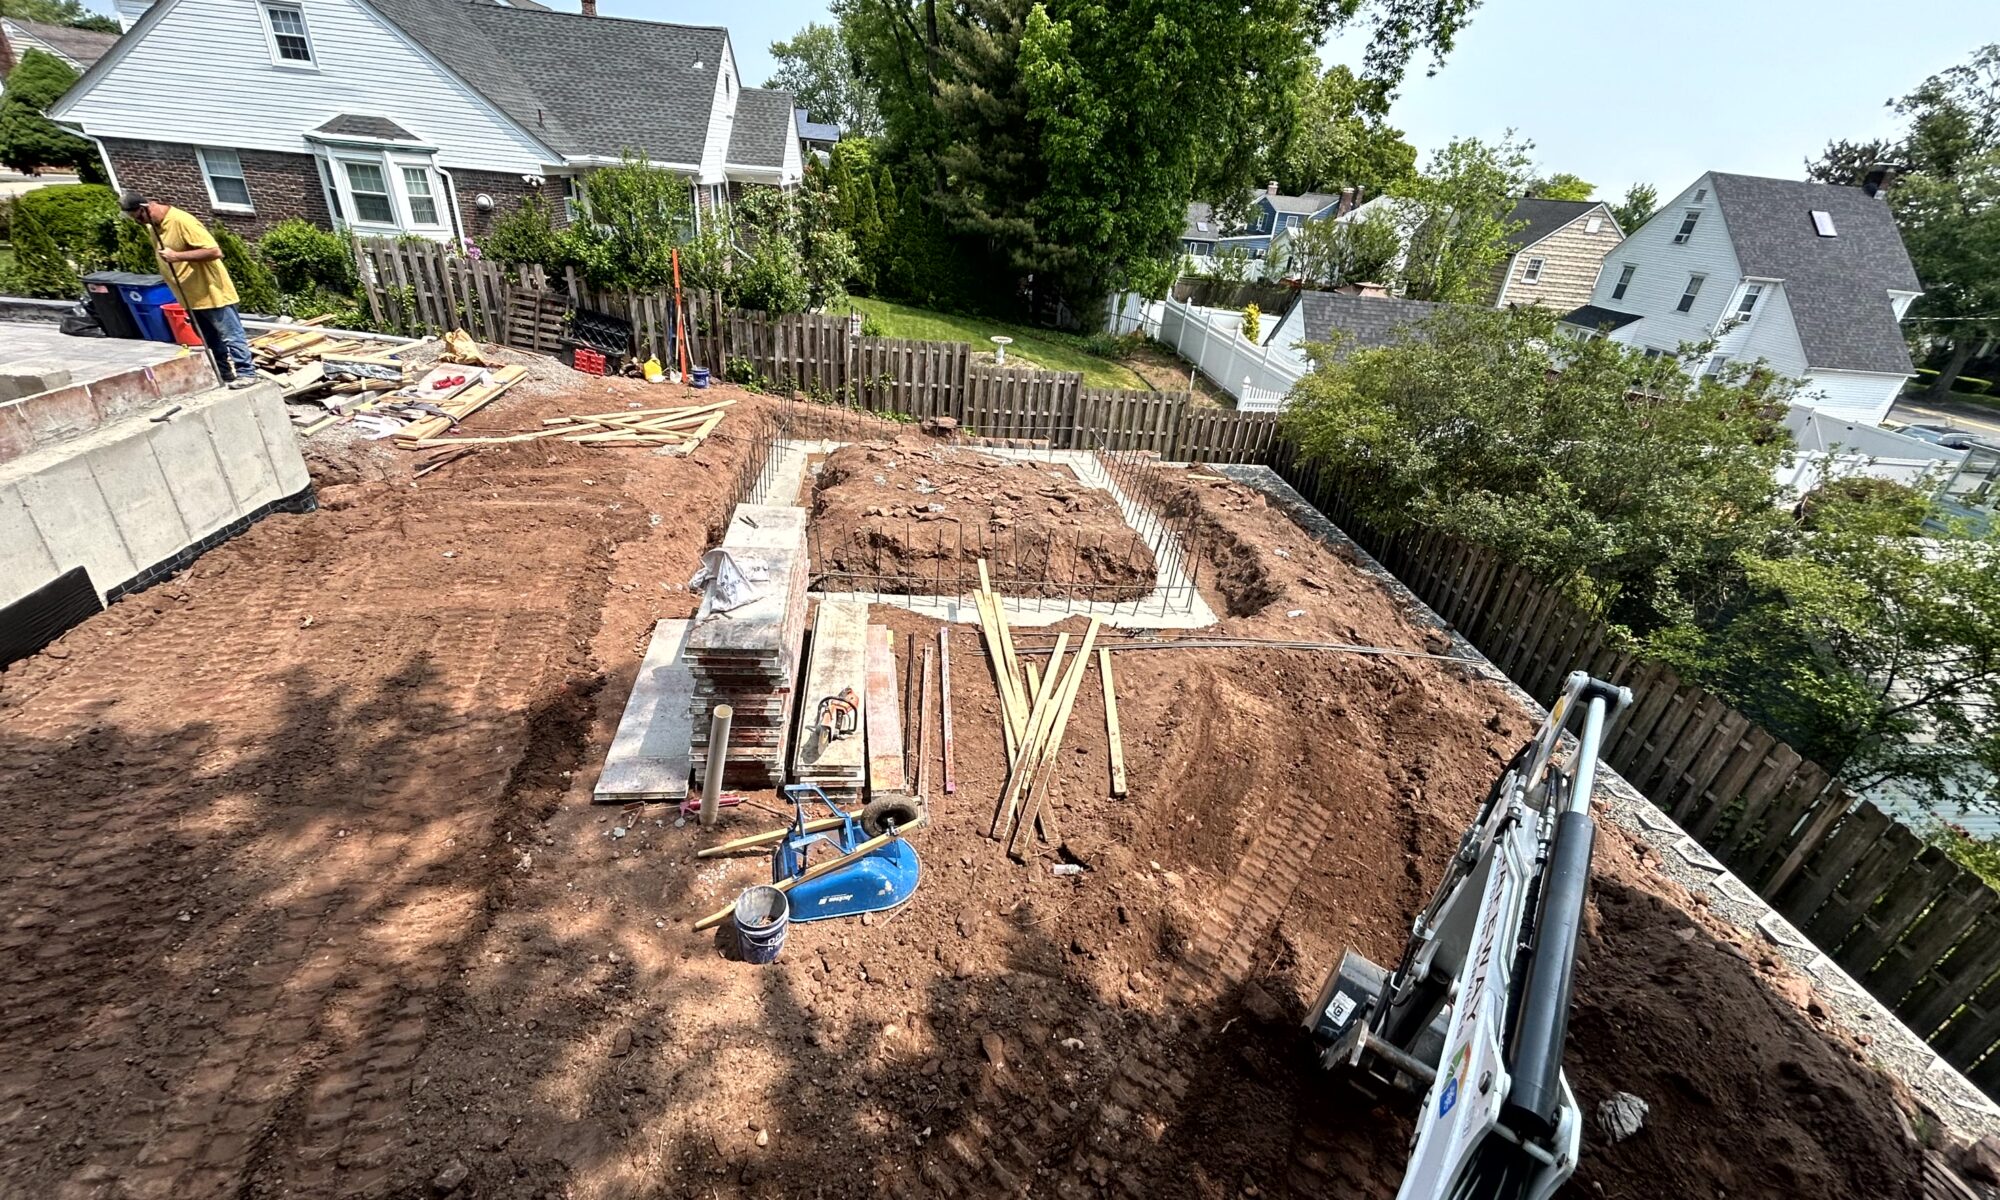 Excavation and Grading